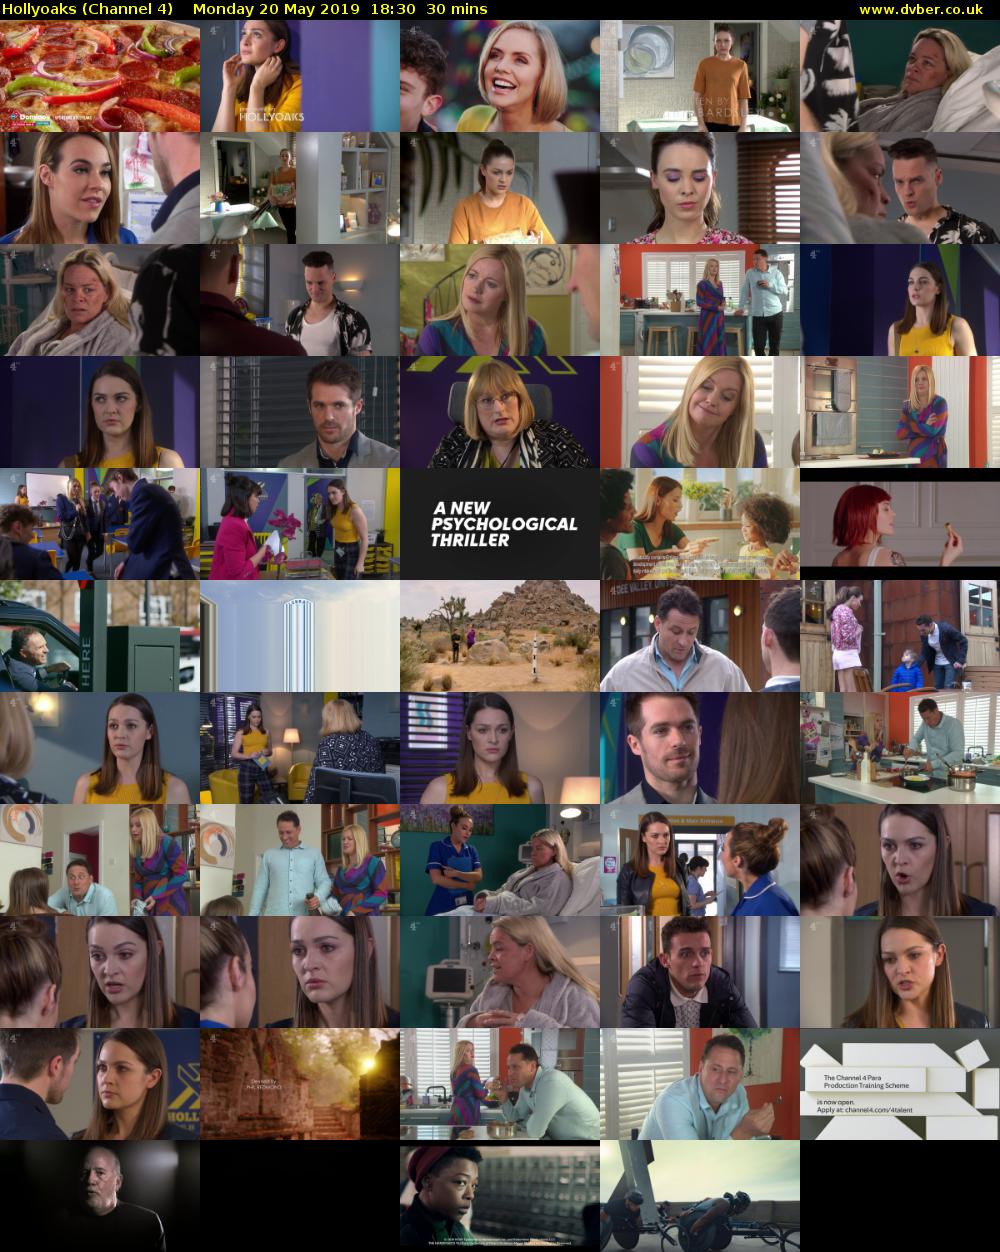 Hollyoaks (Channel 4) Monday 20 May 2019 18:30 - 19:00